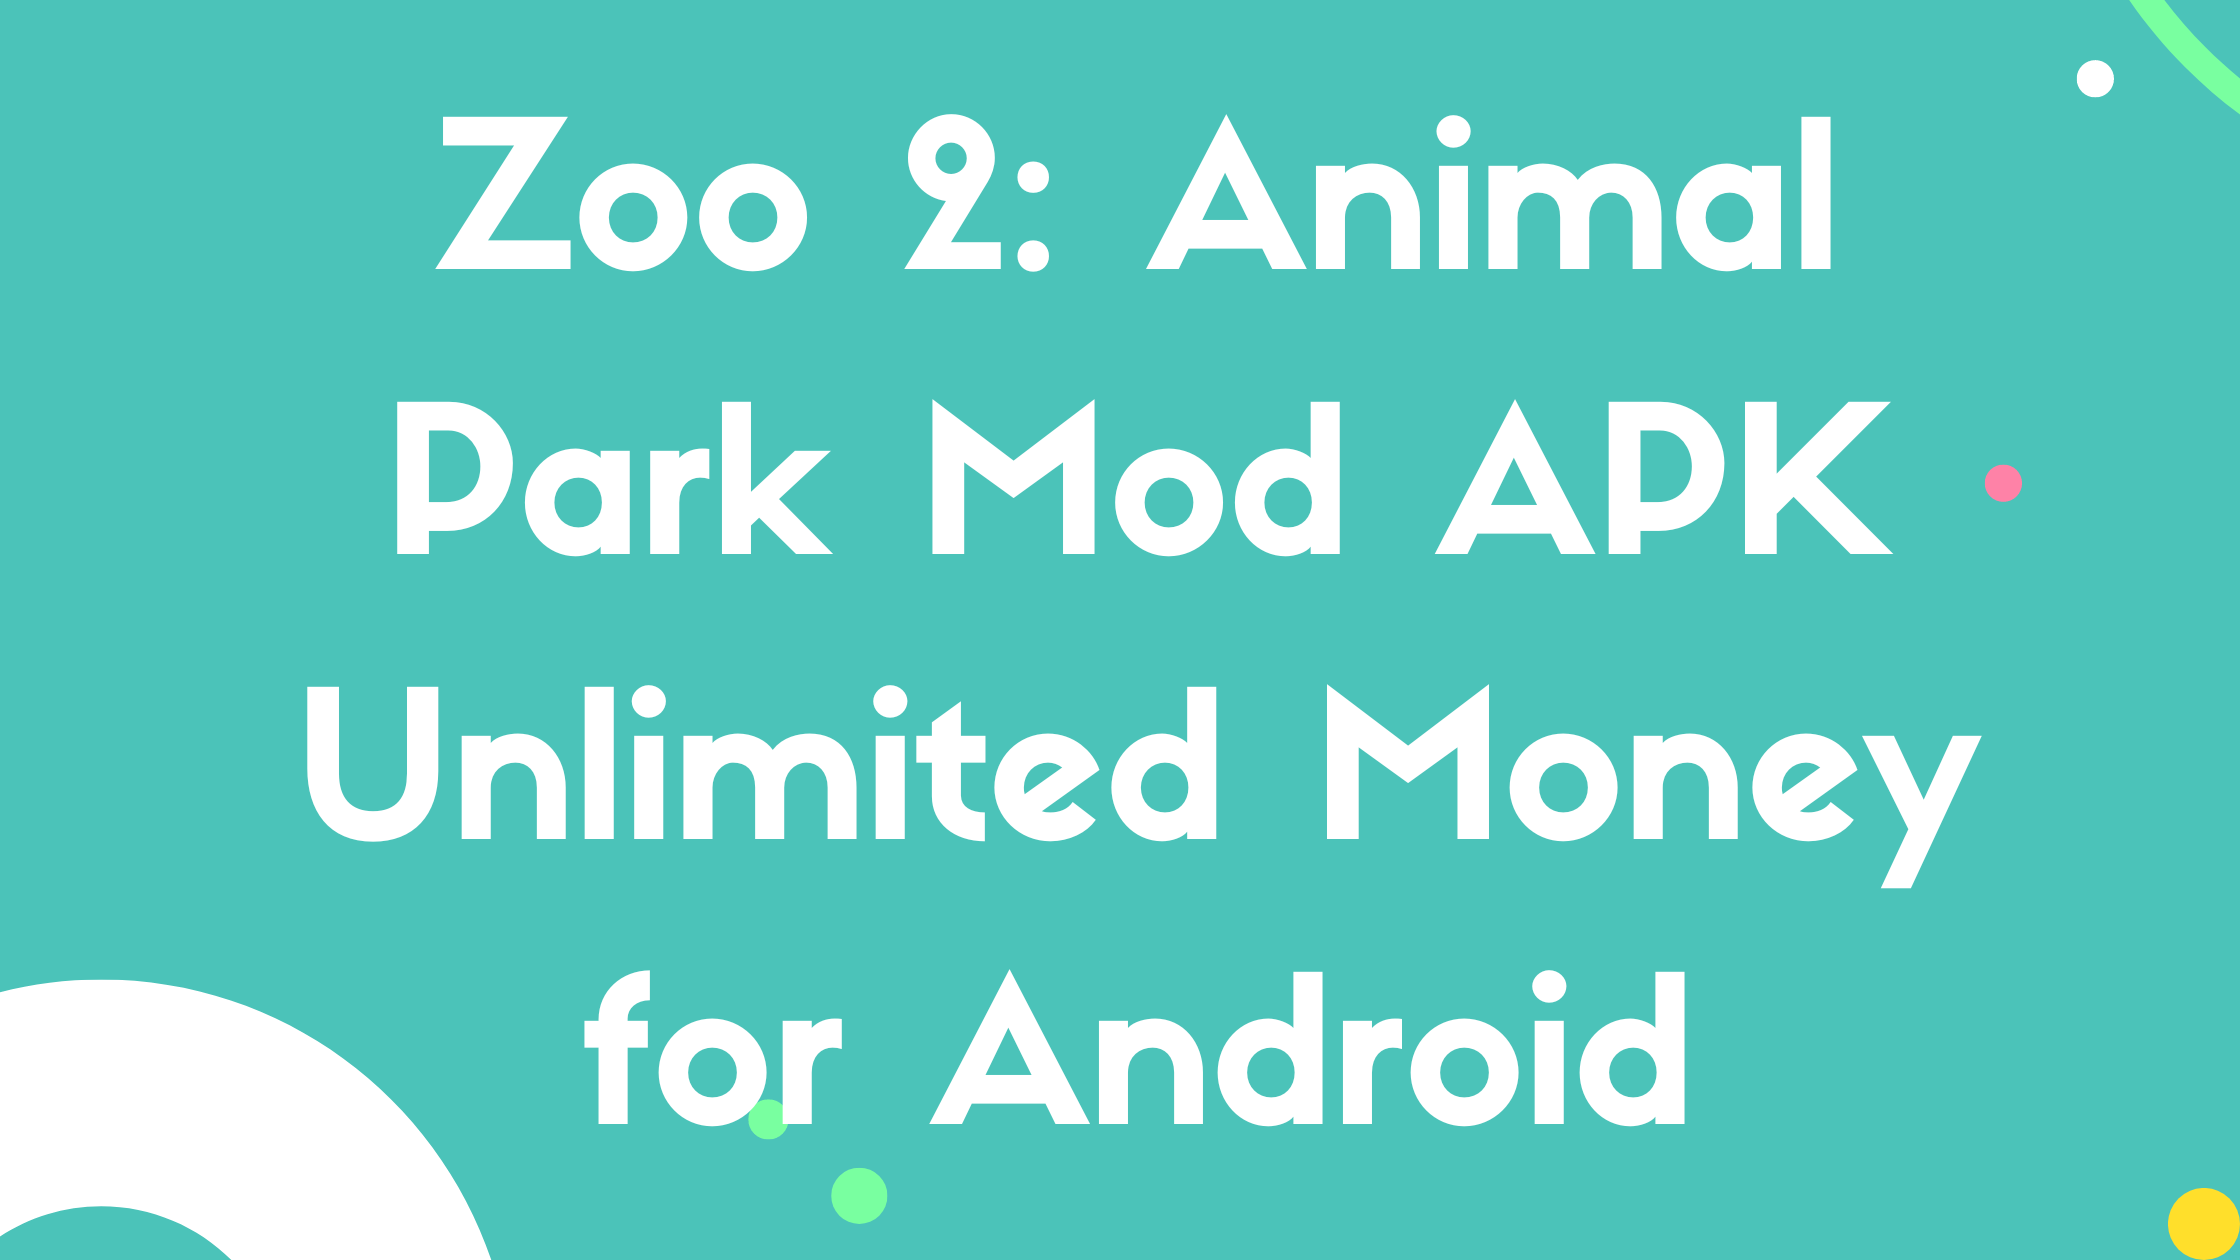 Zoo 2: Animal Park Mod APK Unlimited Money for Android